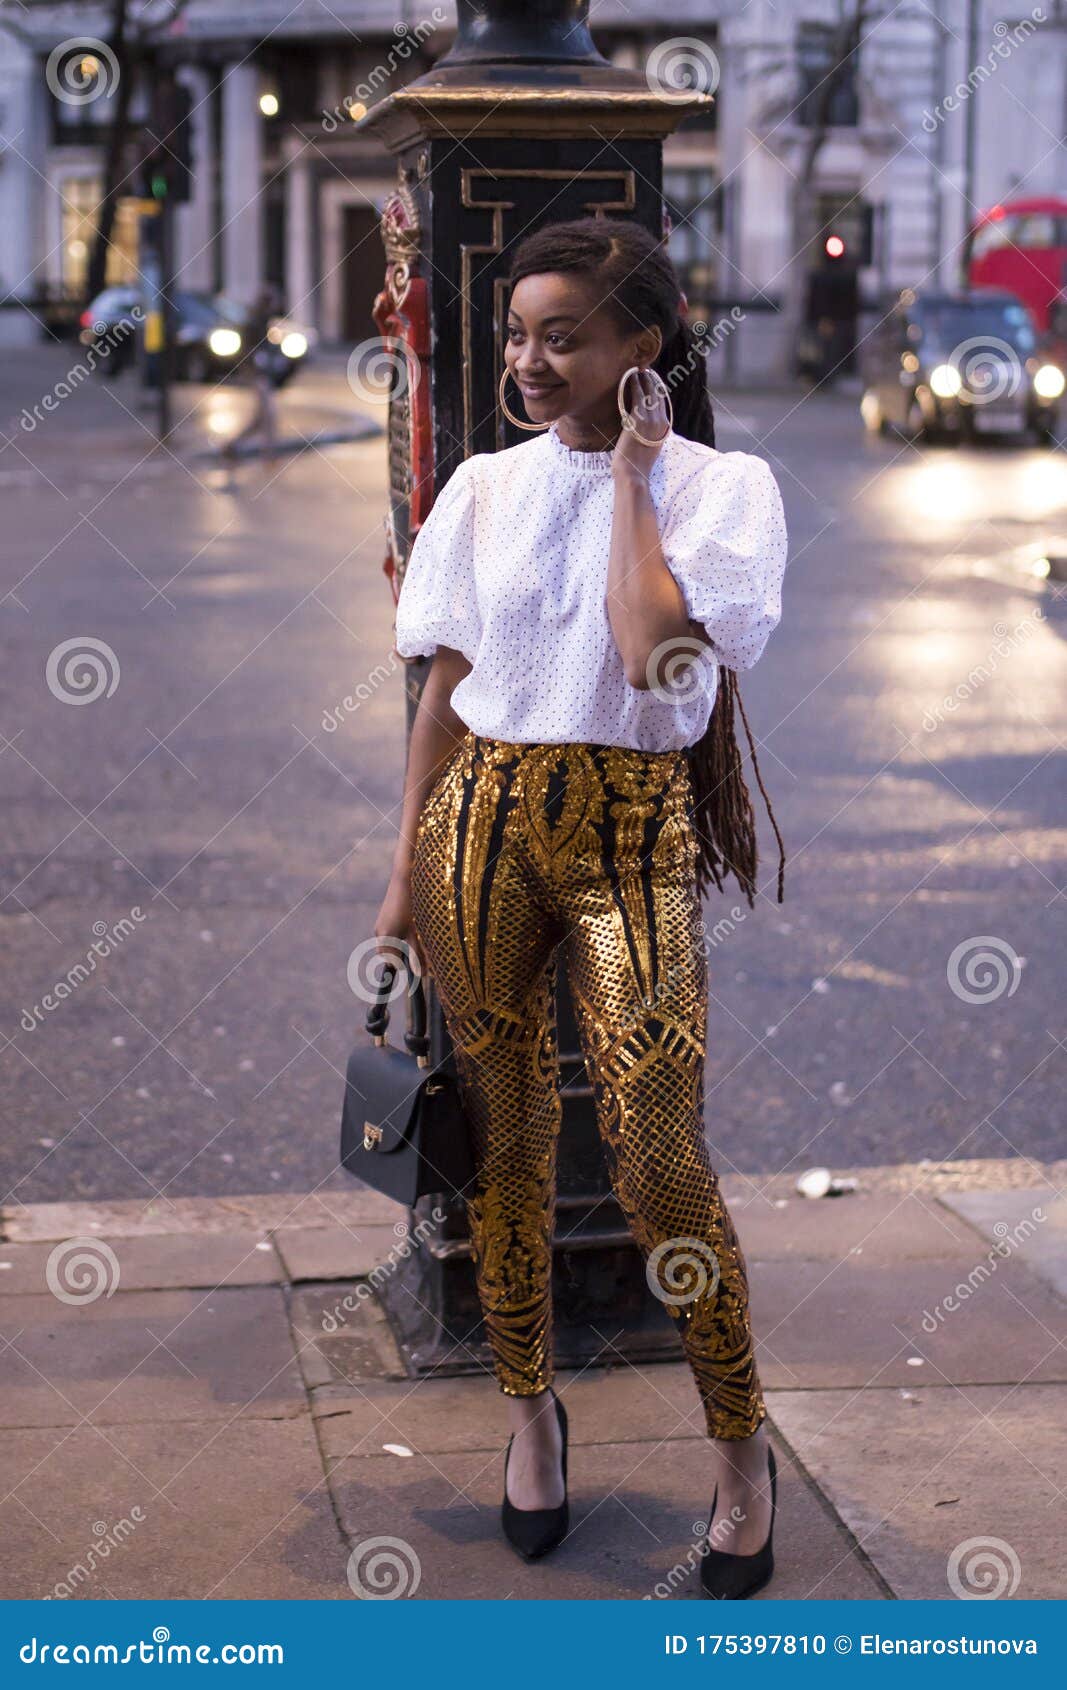 Fashionable People on the Street . Street Style Editorial Image - Image ...